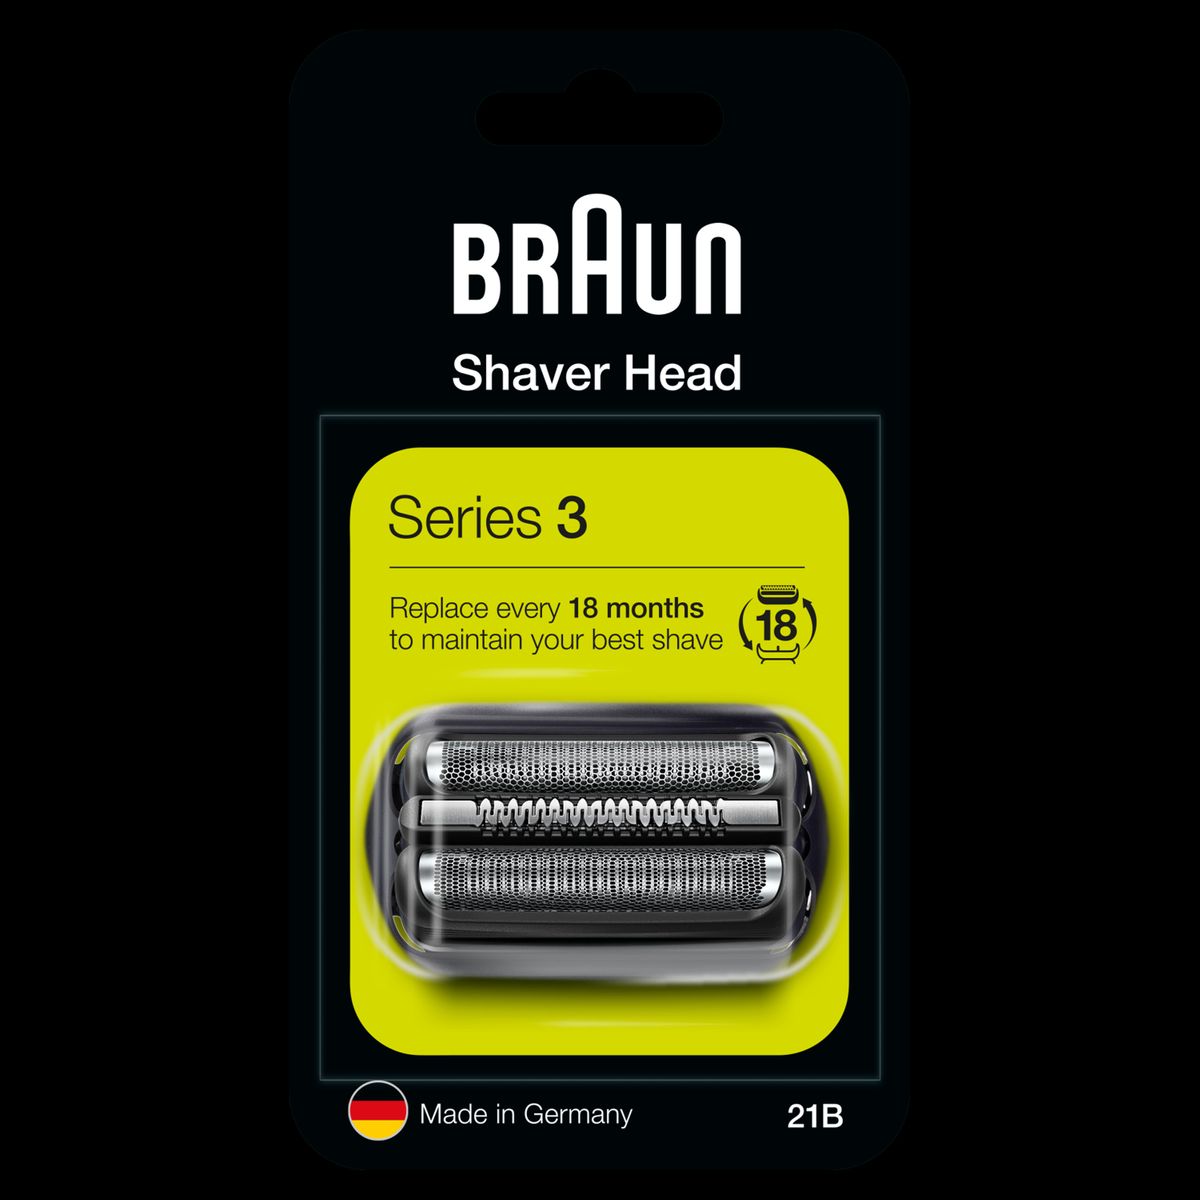 Braun Series 3 21B Electric Shaver Replacement Shaver Part - Black - Compatible with Series 3 Shavers